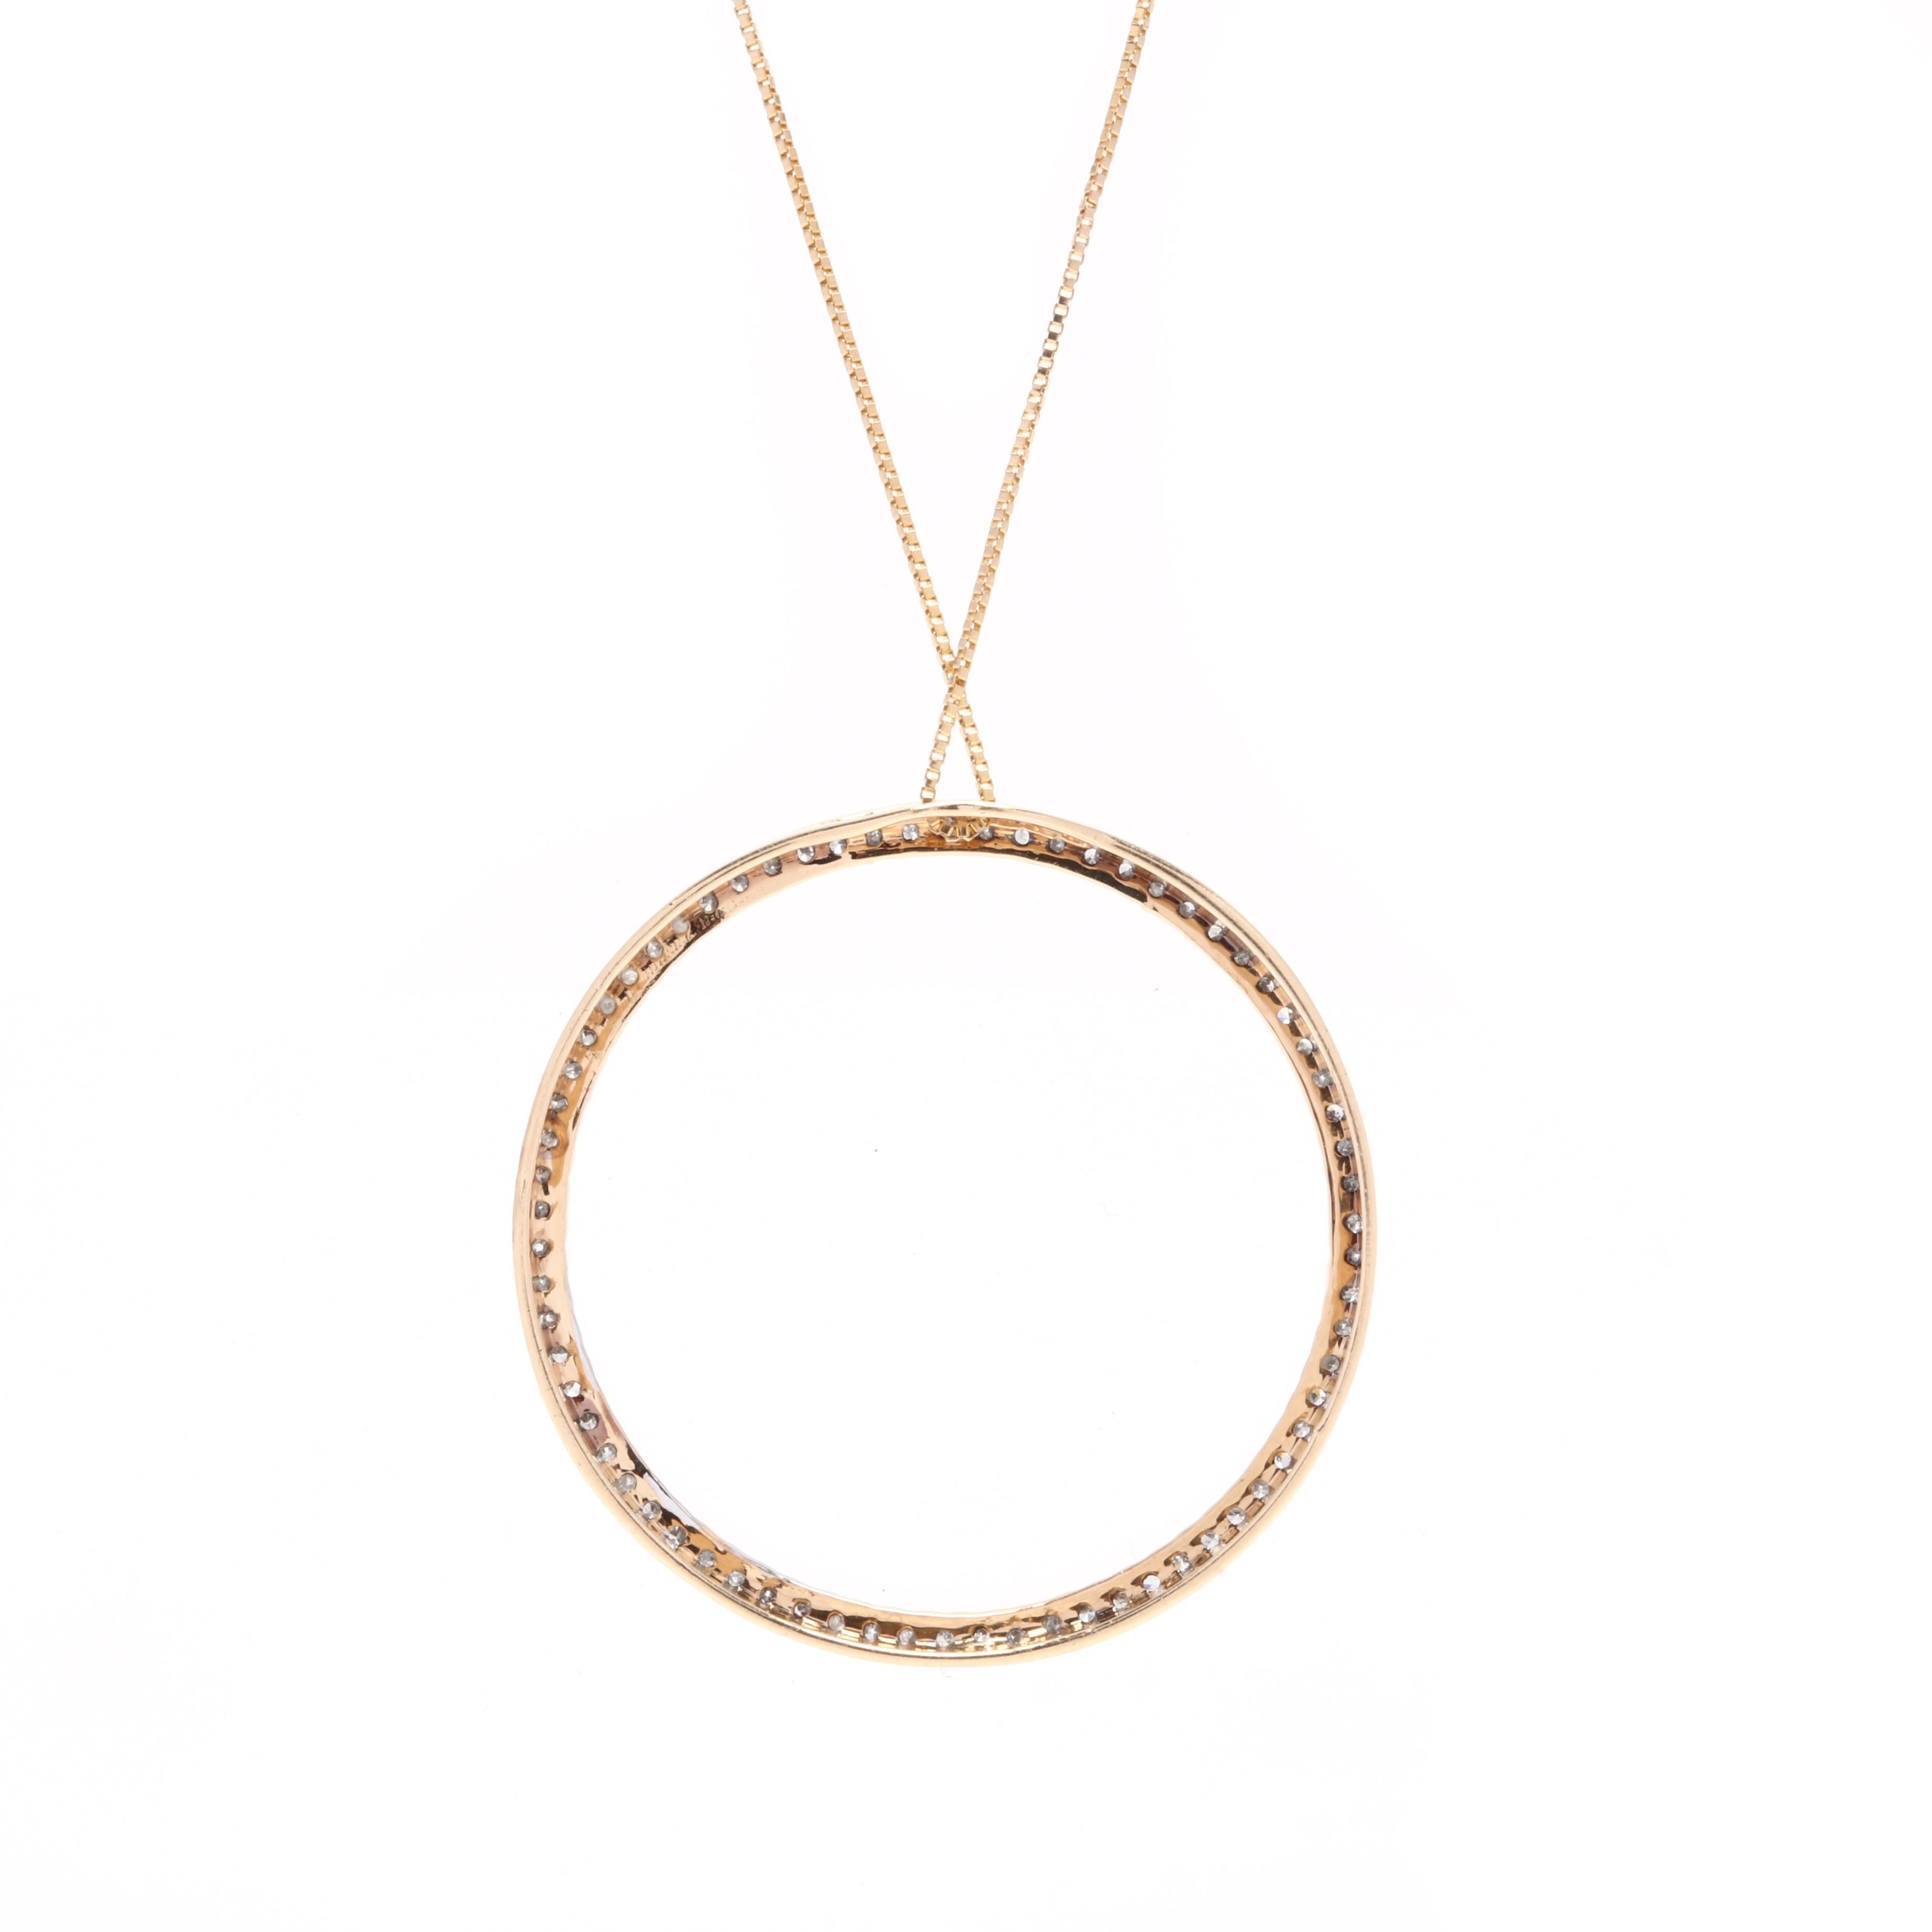 A classic diamond circle pendant set with 70 round, single cut diamonds in 14k yellow gold. The diamonds are 1.1 mm each coming to an approximate 0.50 carat total weight. They are J-L in color and I2-I3 in clarity. The pendant comes on a dainty box